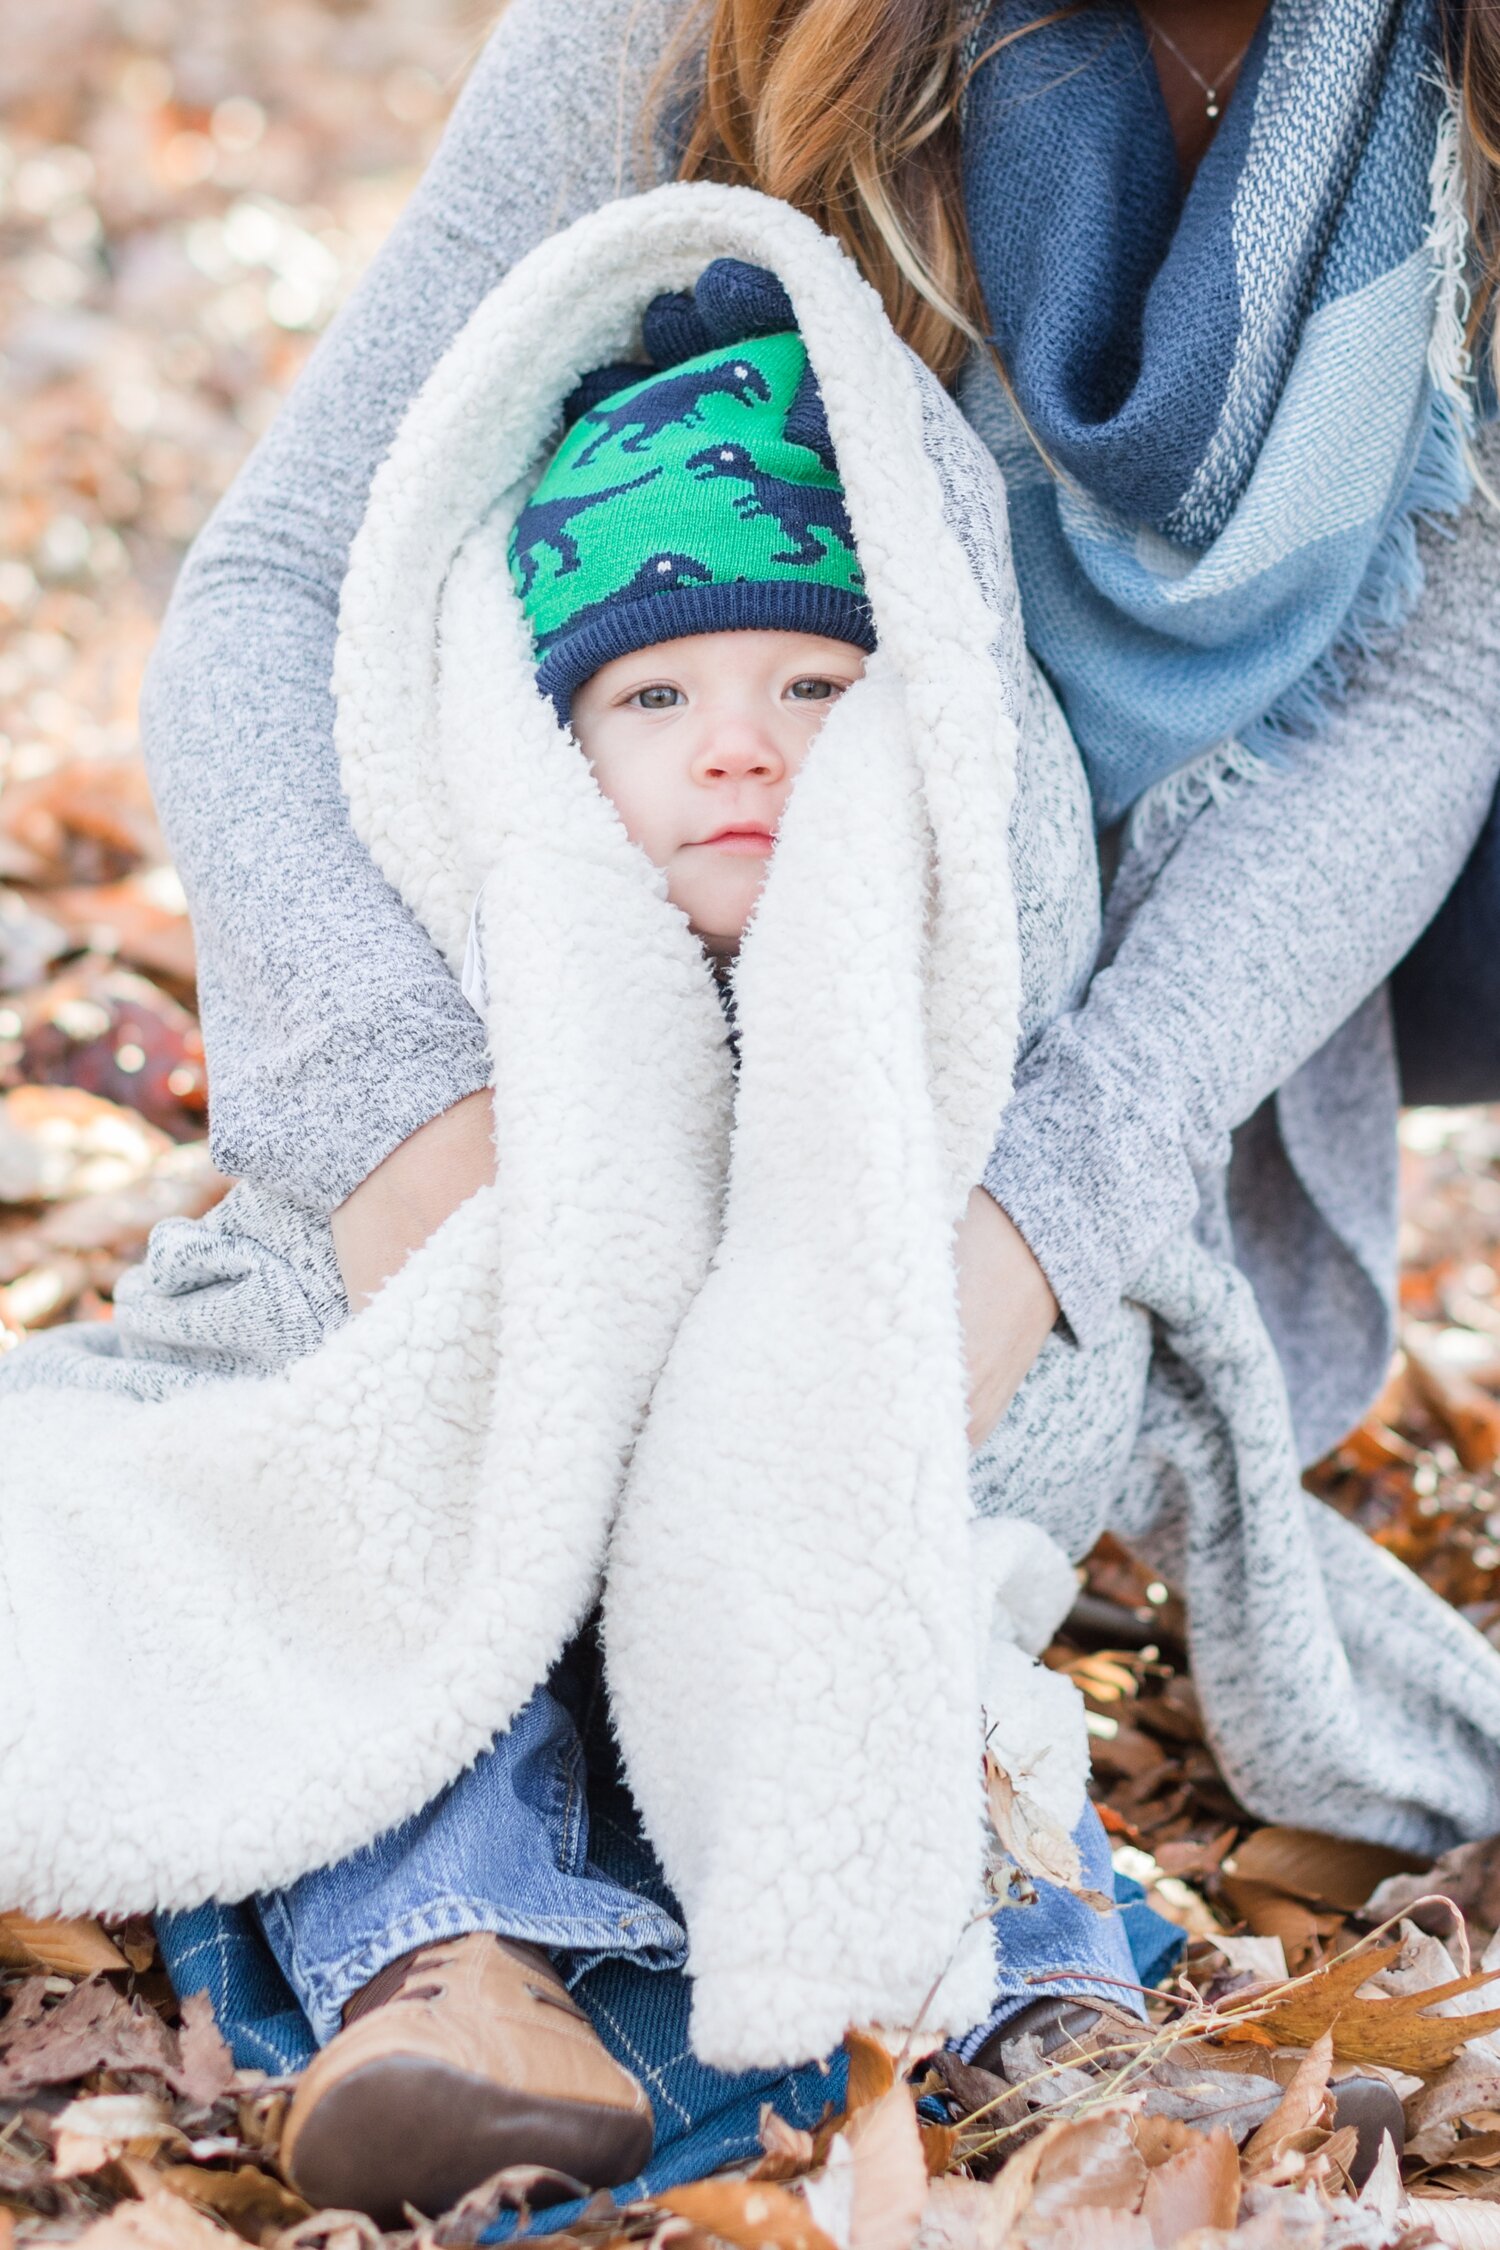  Cozy babe, it was a little chilly during the shoot! 